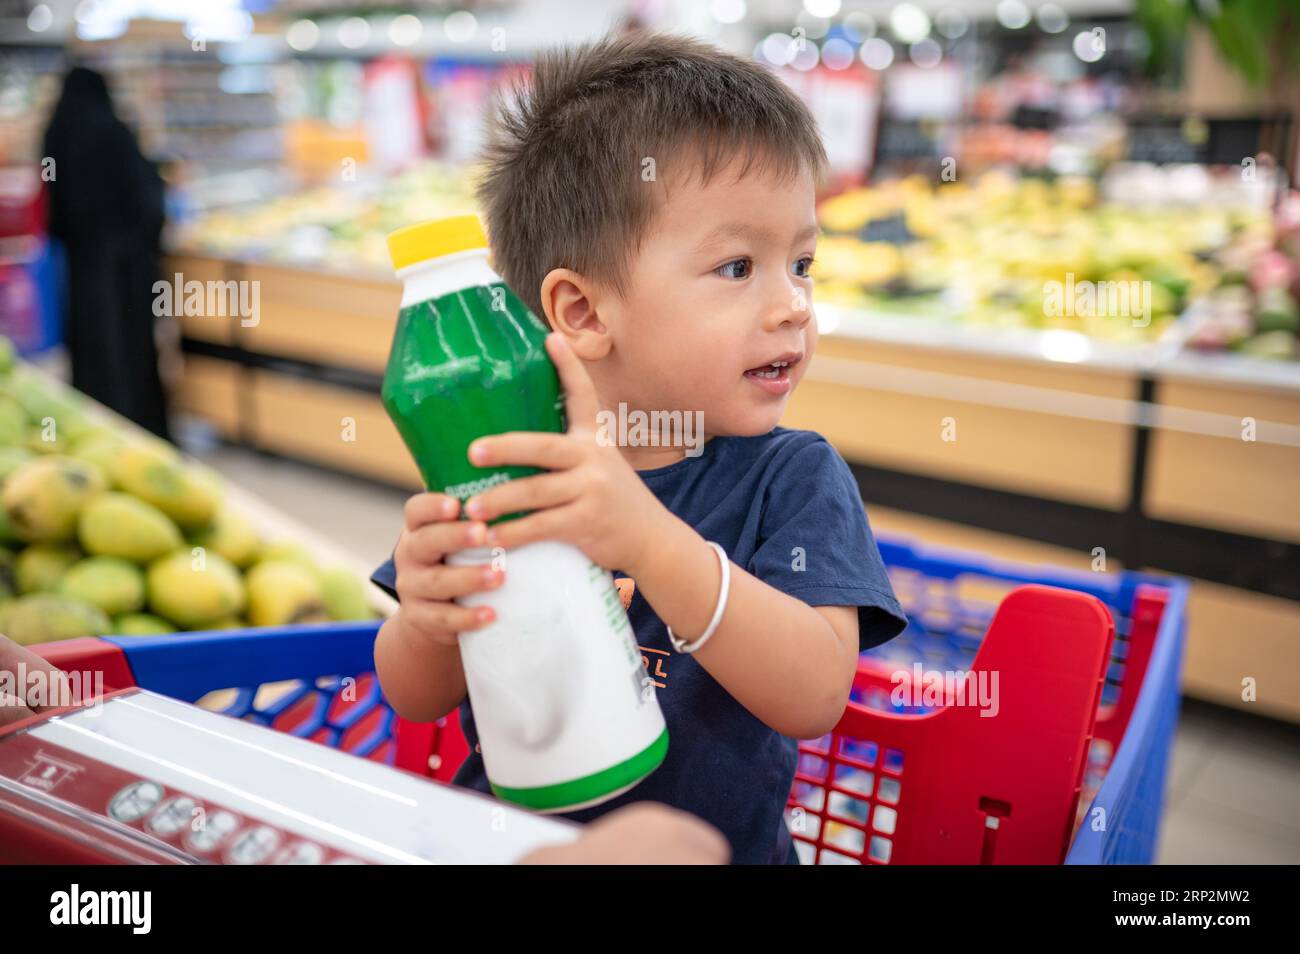 Two year old adorable, smiling multiracial toddler in a blue t-shirt sitting in a shopping trolley with groceries, holding a bottle with small hands, Stock Photo